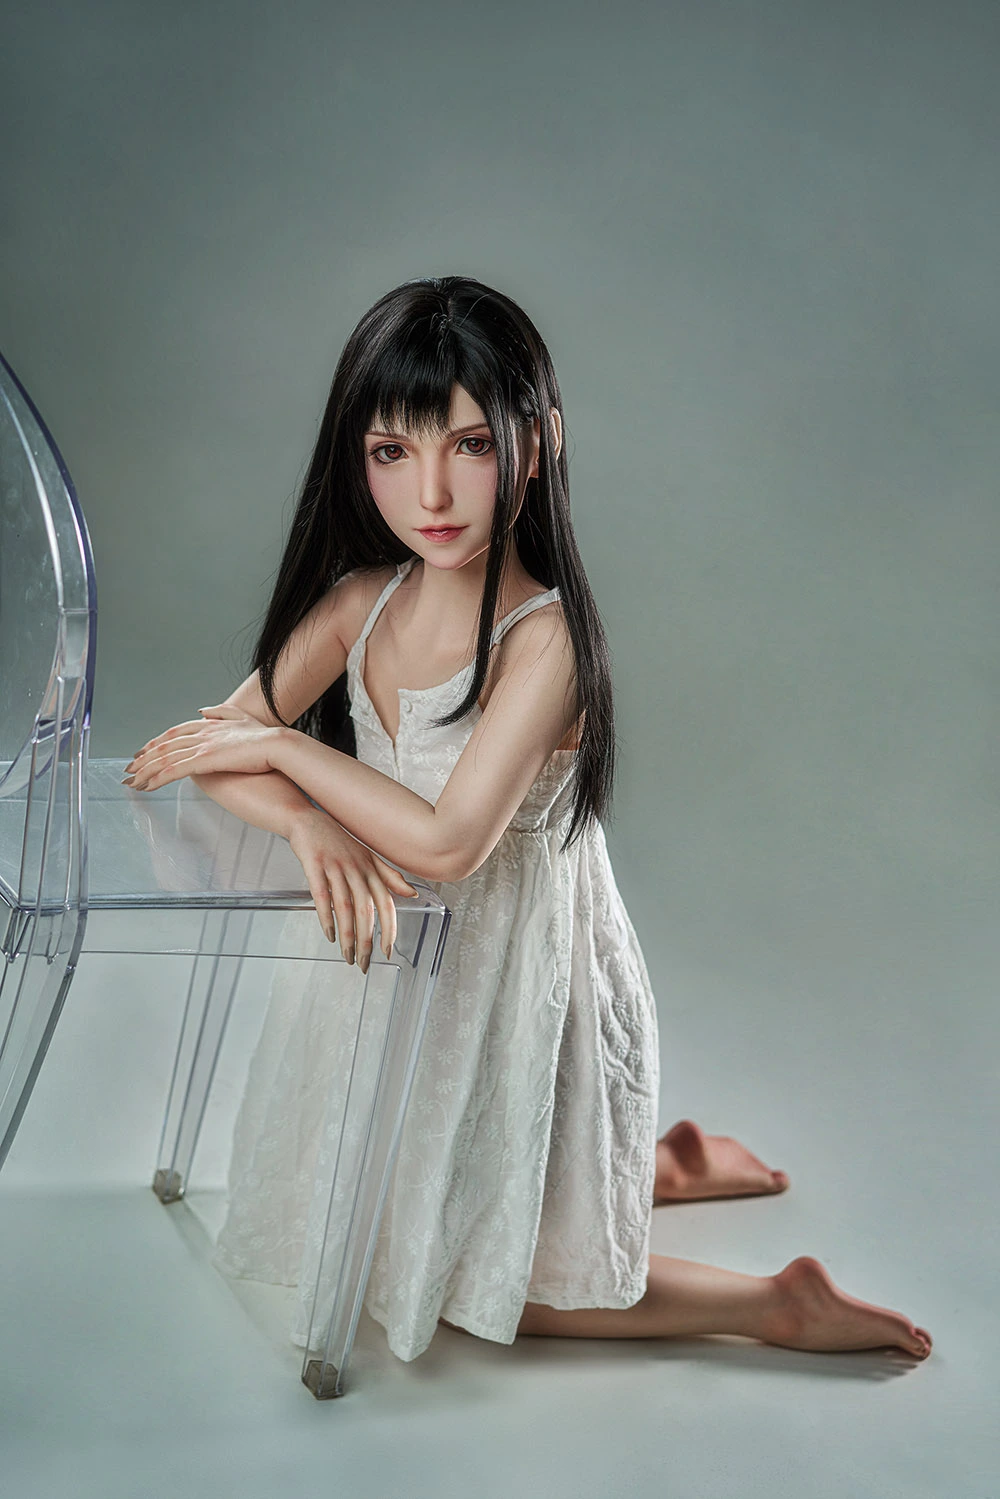 game character final fantasy sexdoll